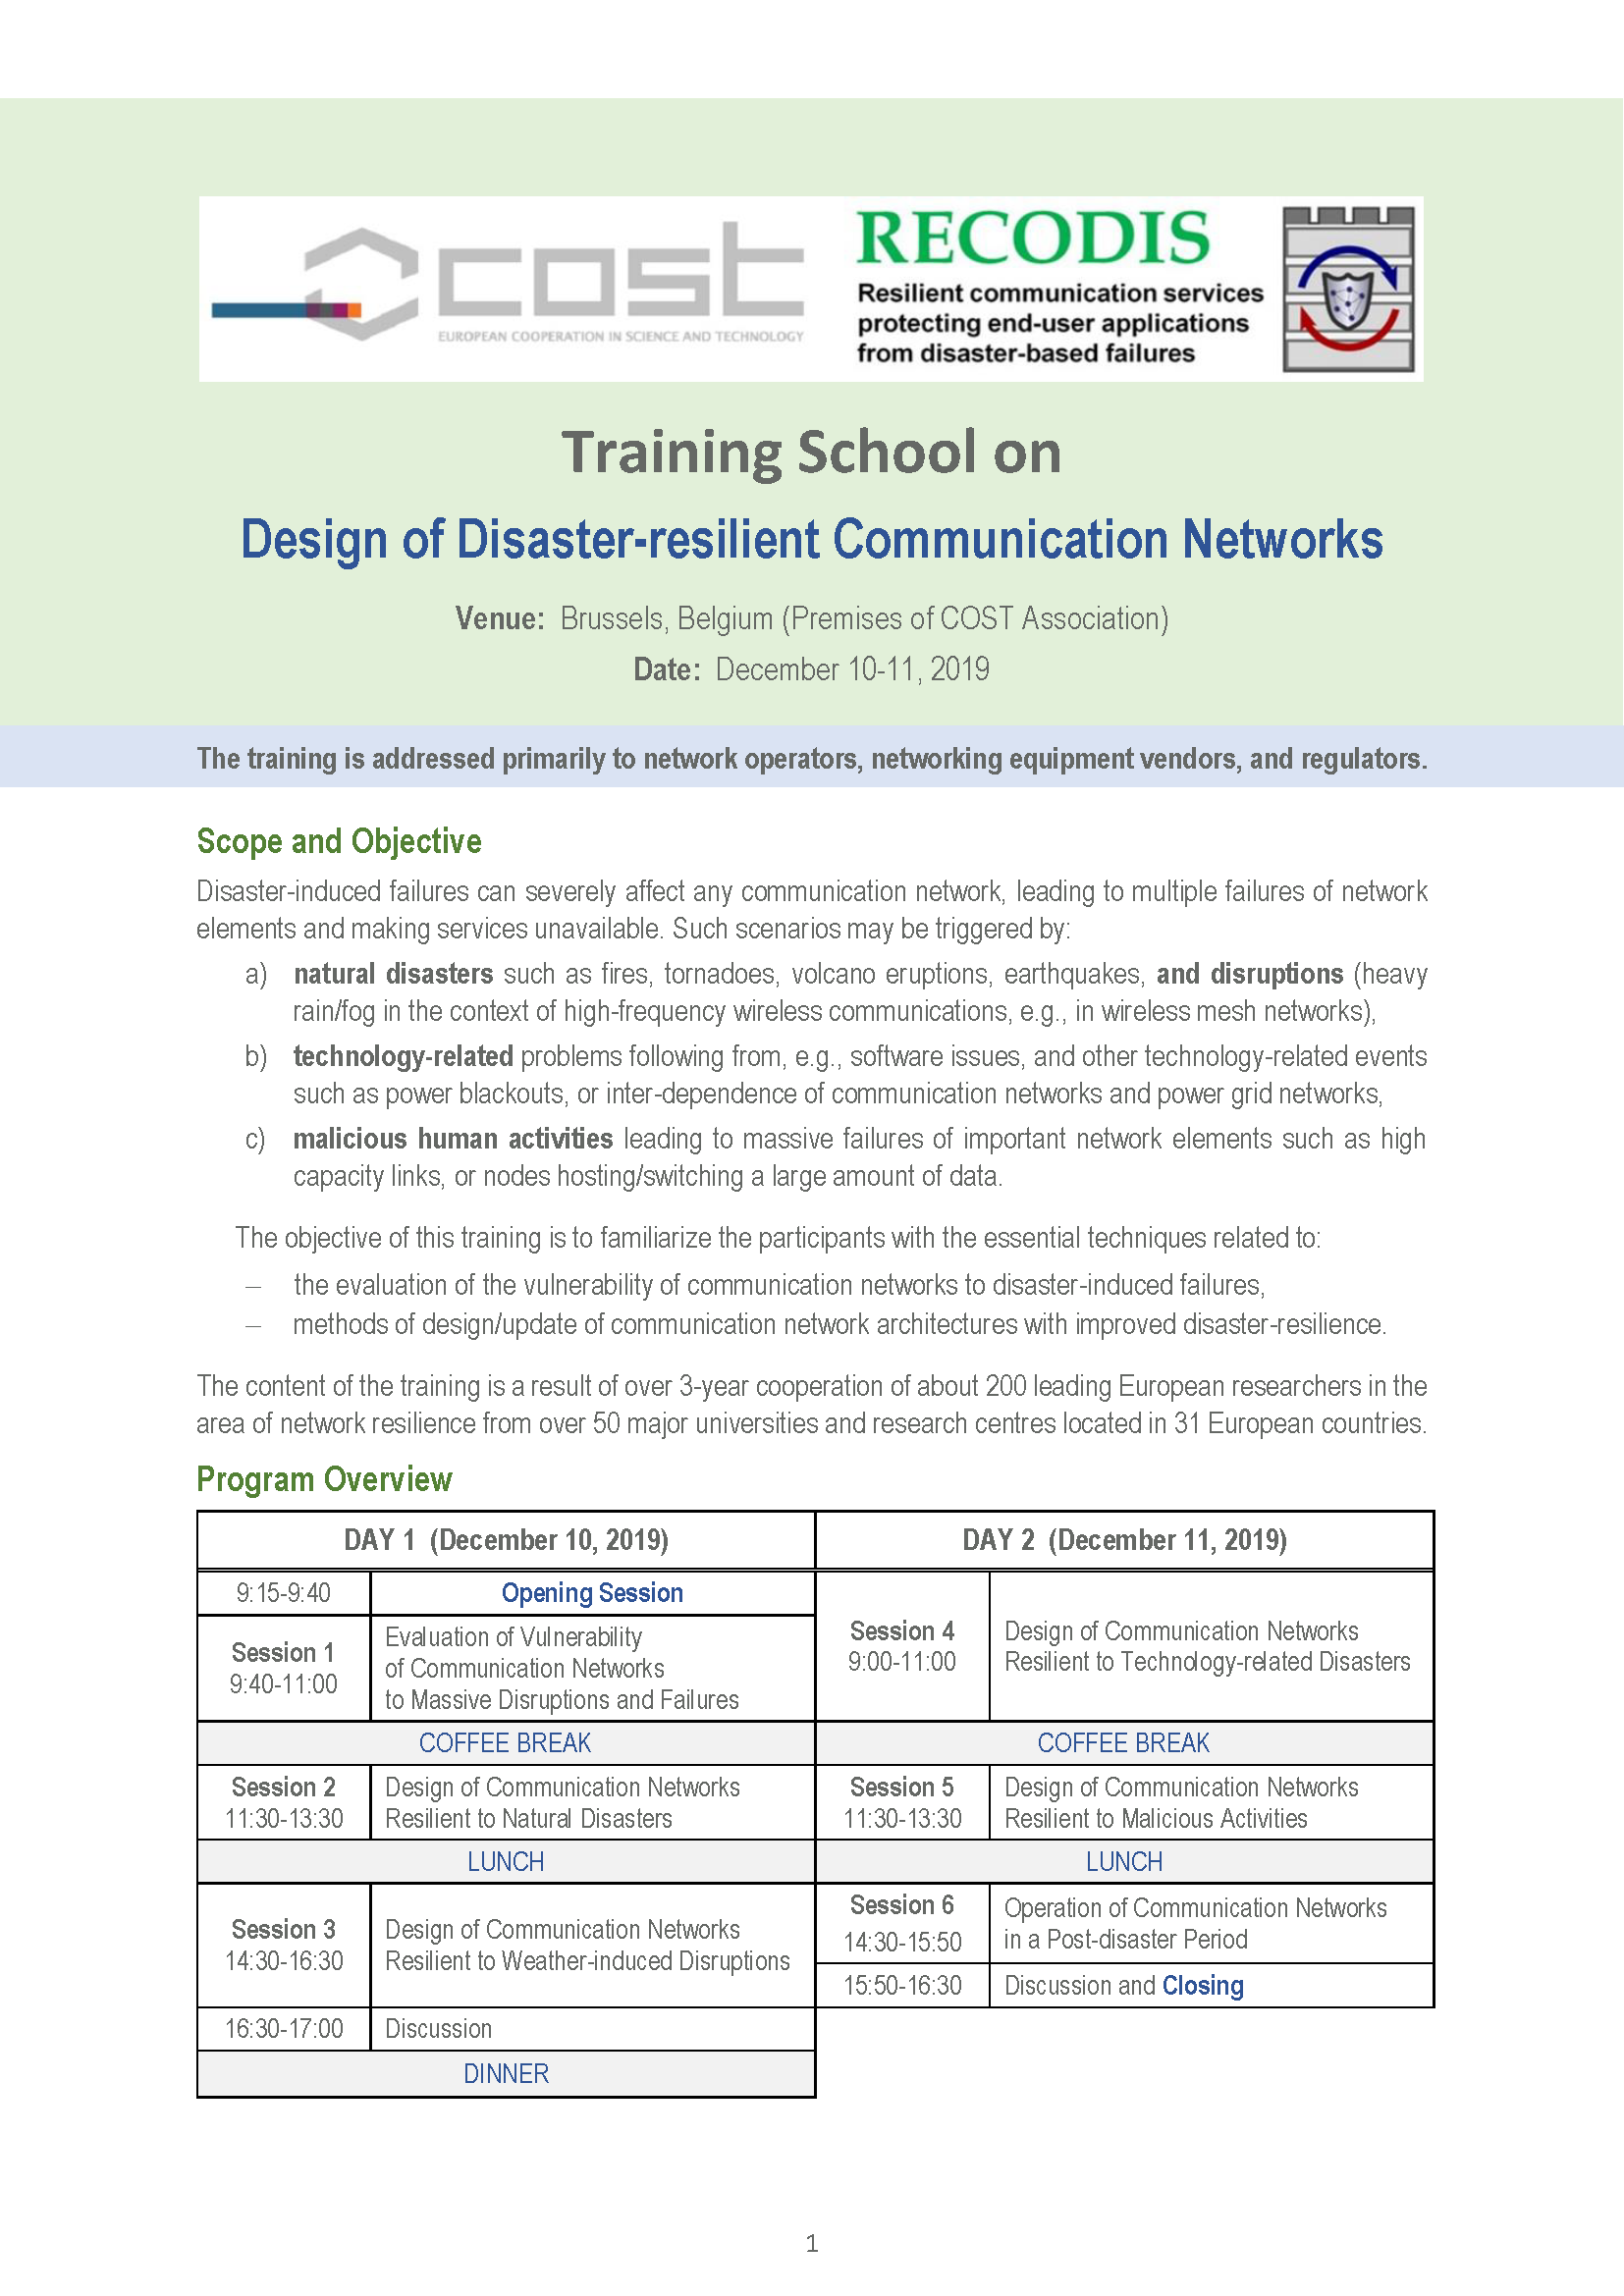 RECODIS Training on Design of Disaster resilient Communication Networks